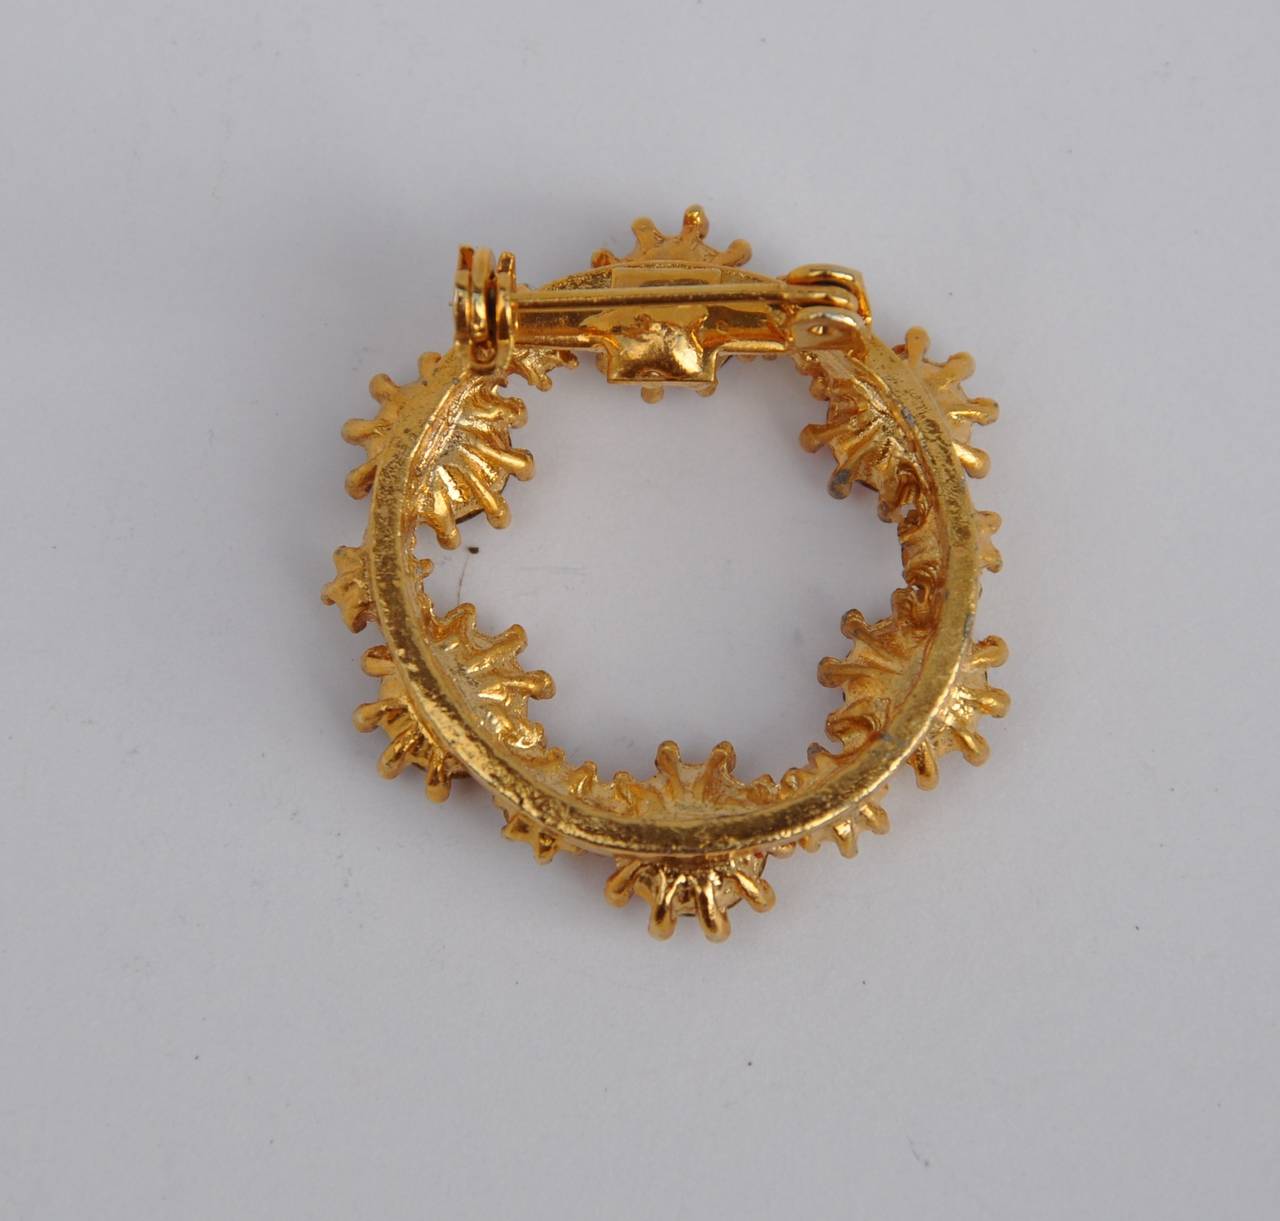 Gilded gold vermeil accented with ruby rhinestones circular brooch measures 1 1/4" in circumference, depth is 2/8".